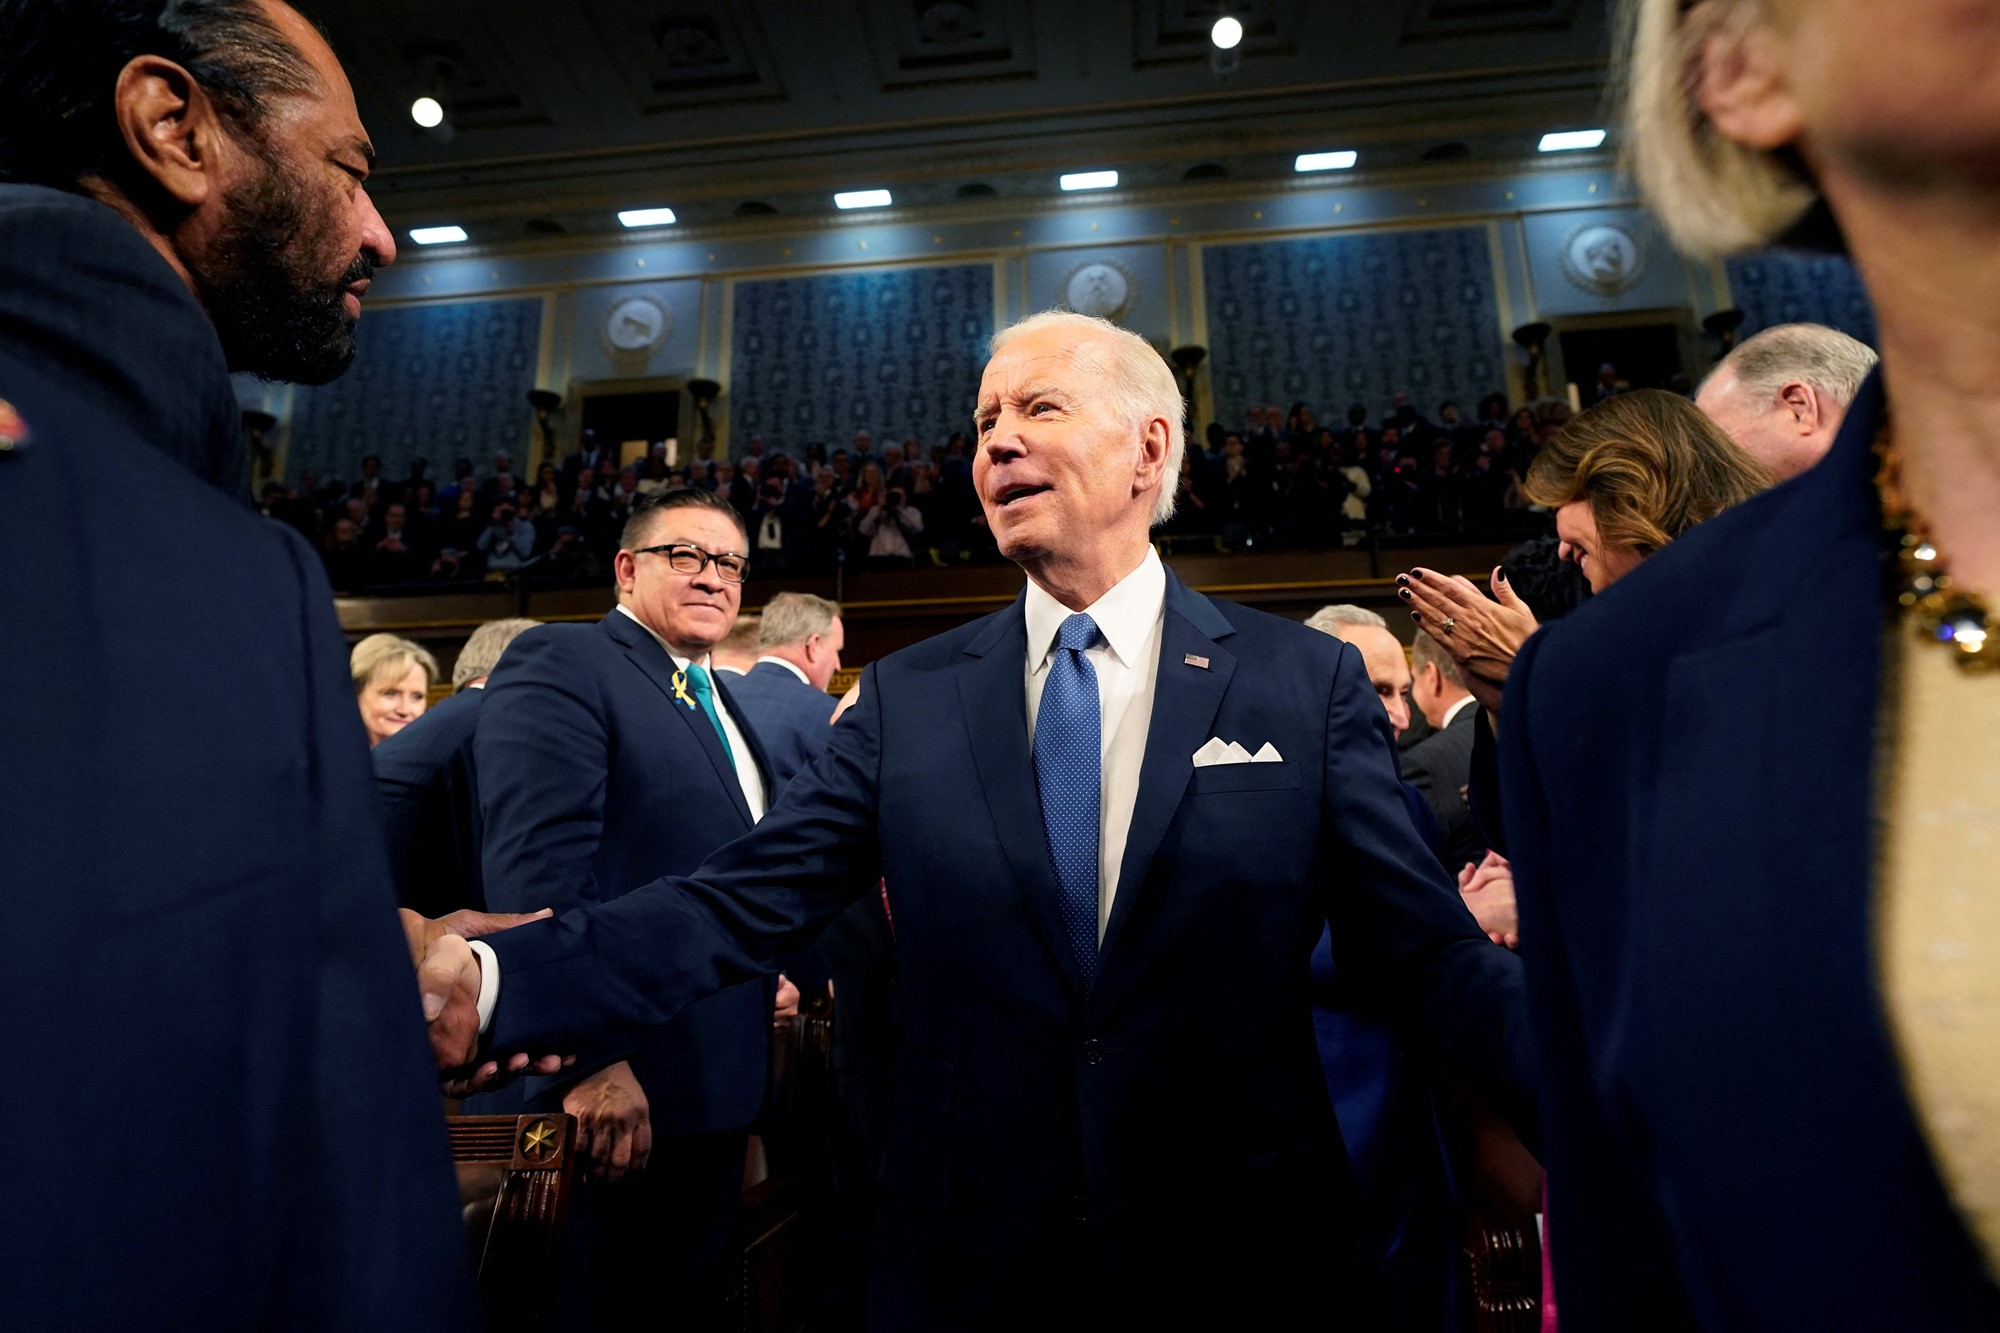 Biden shakes people's hands as he enters the chamber.